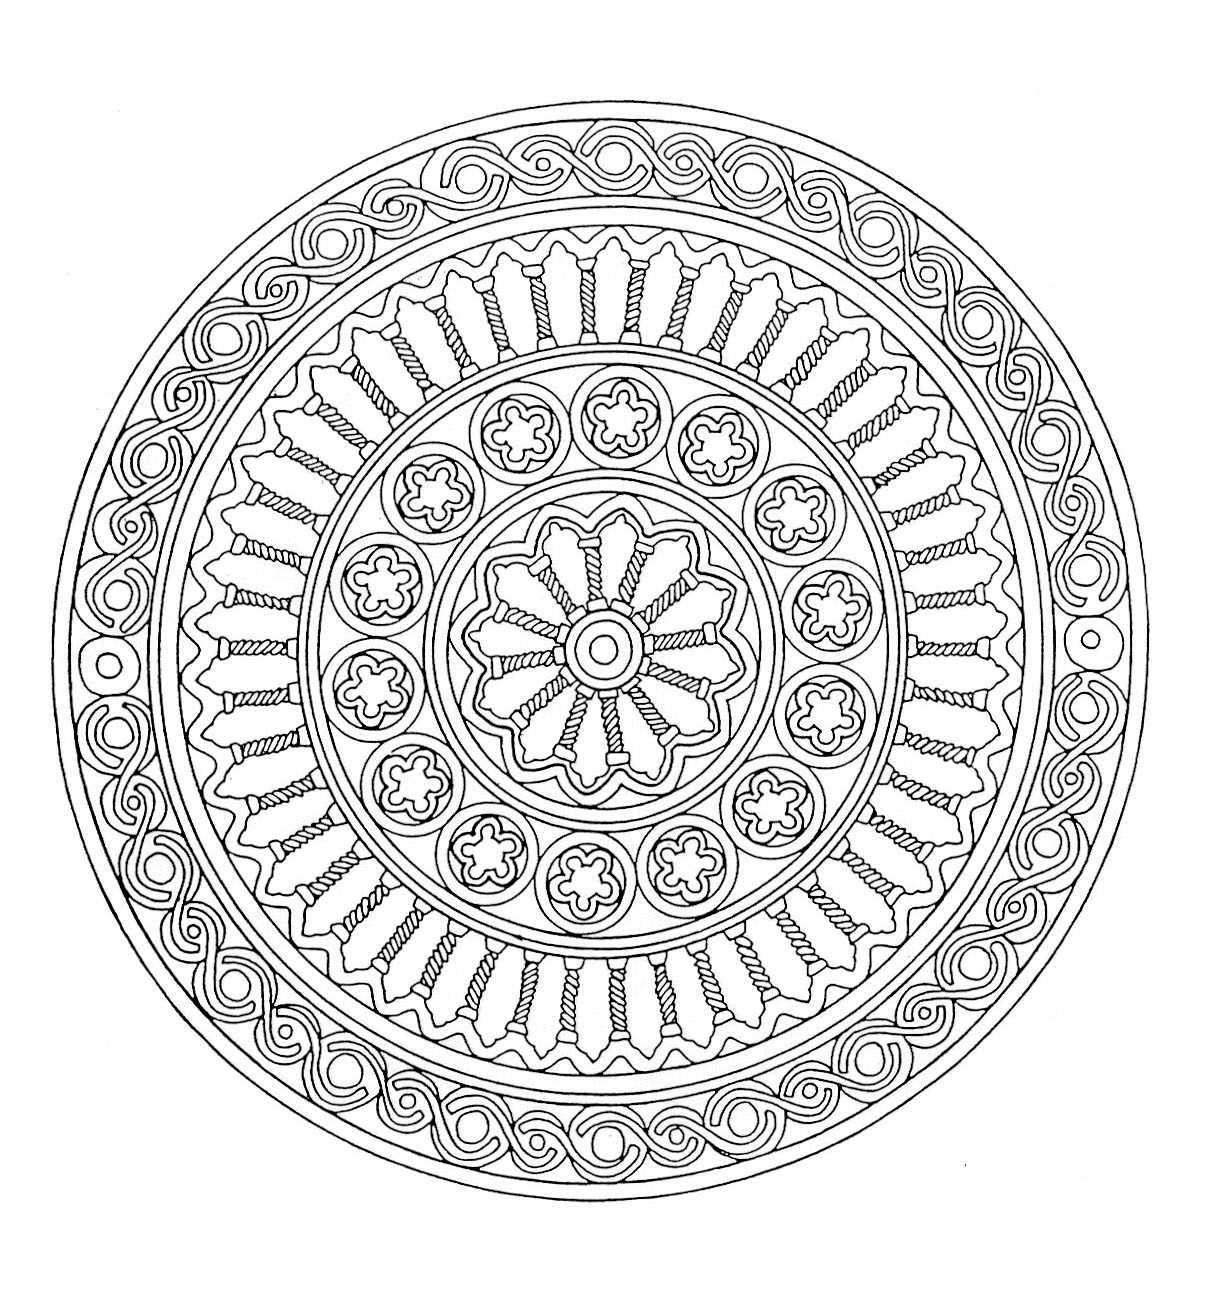 Mandala to color zen relax free - 8